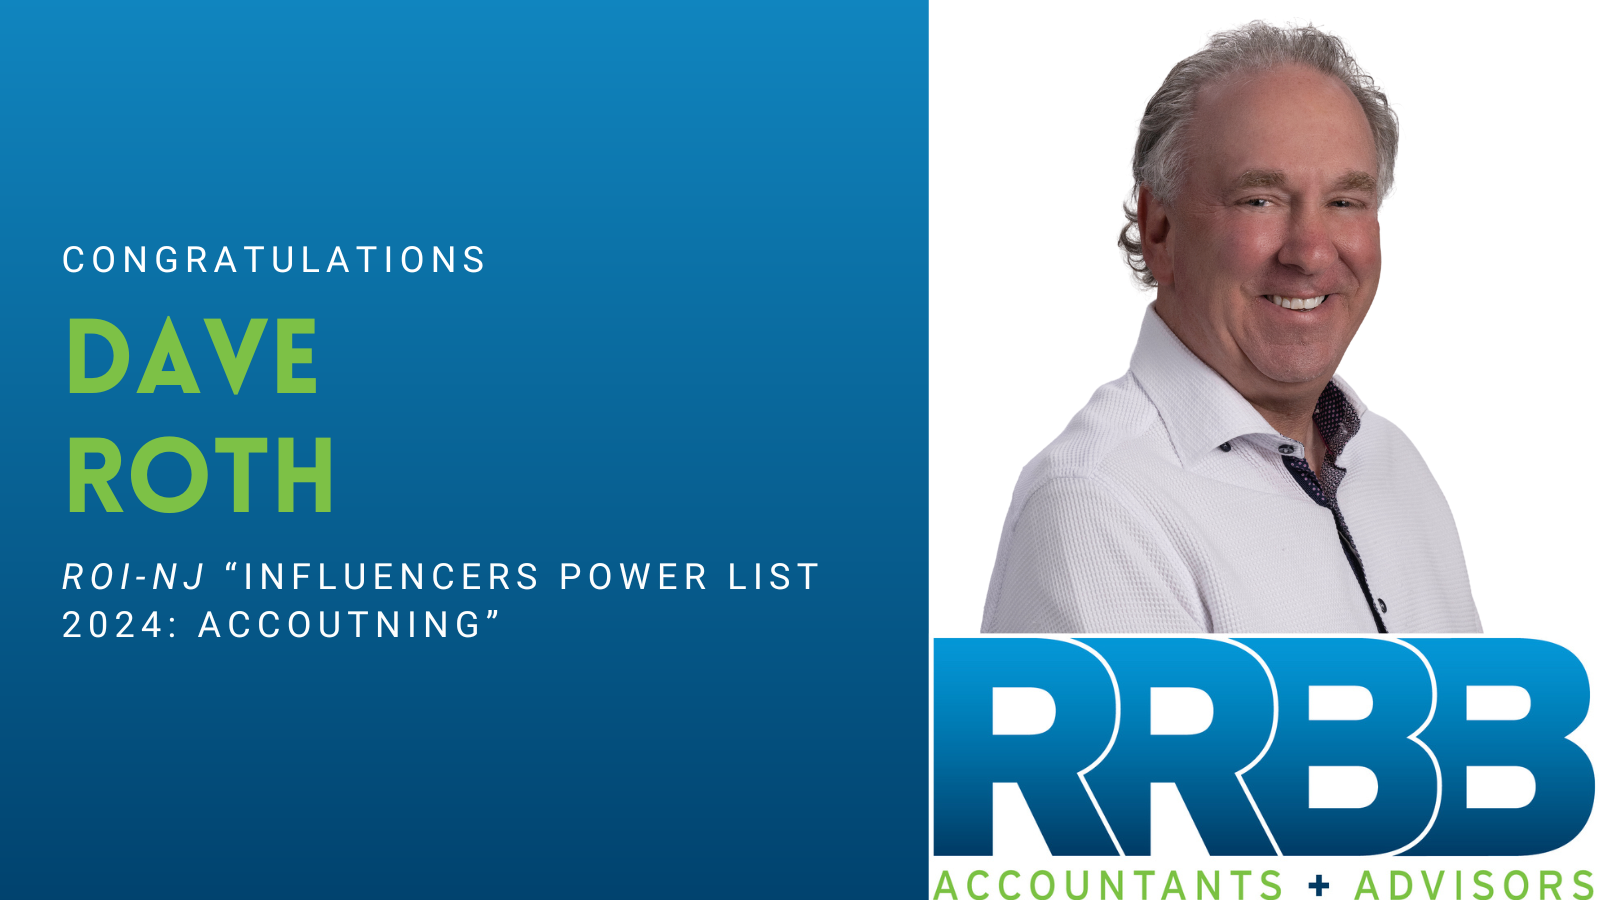 Dave Roth Listed in ROI-NJ’s “Influencers Power List 2024: Accounting” Image